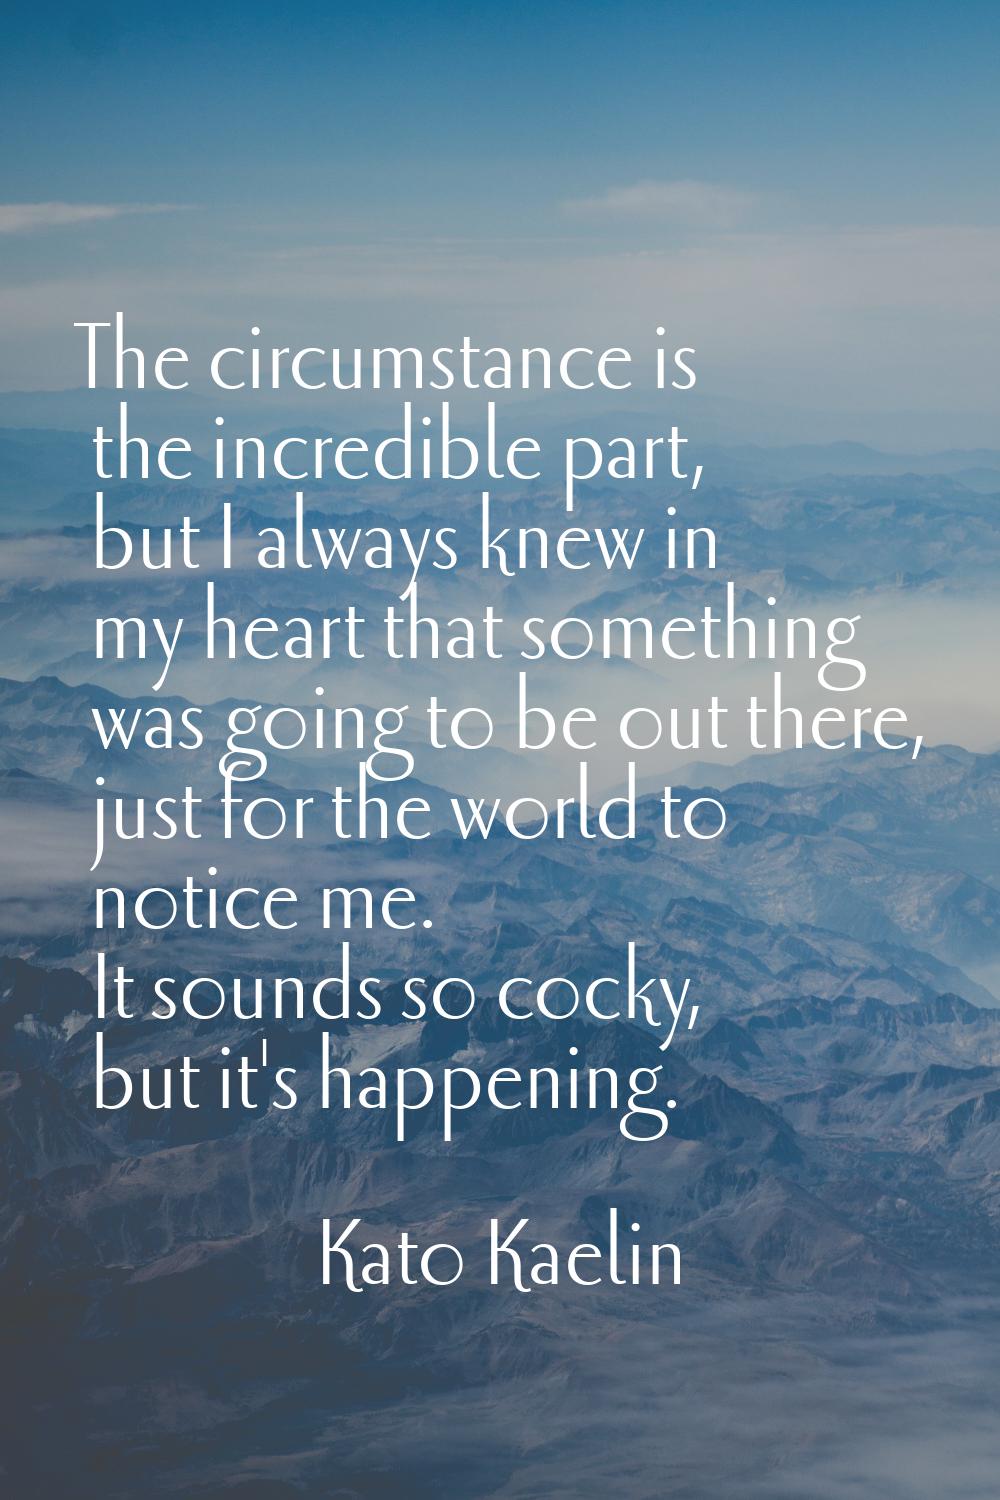 The circumstance is the incredible part, but I always knew in my heart that something was going to 